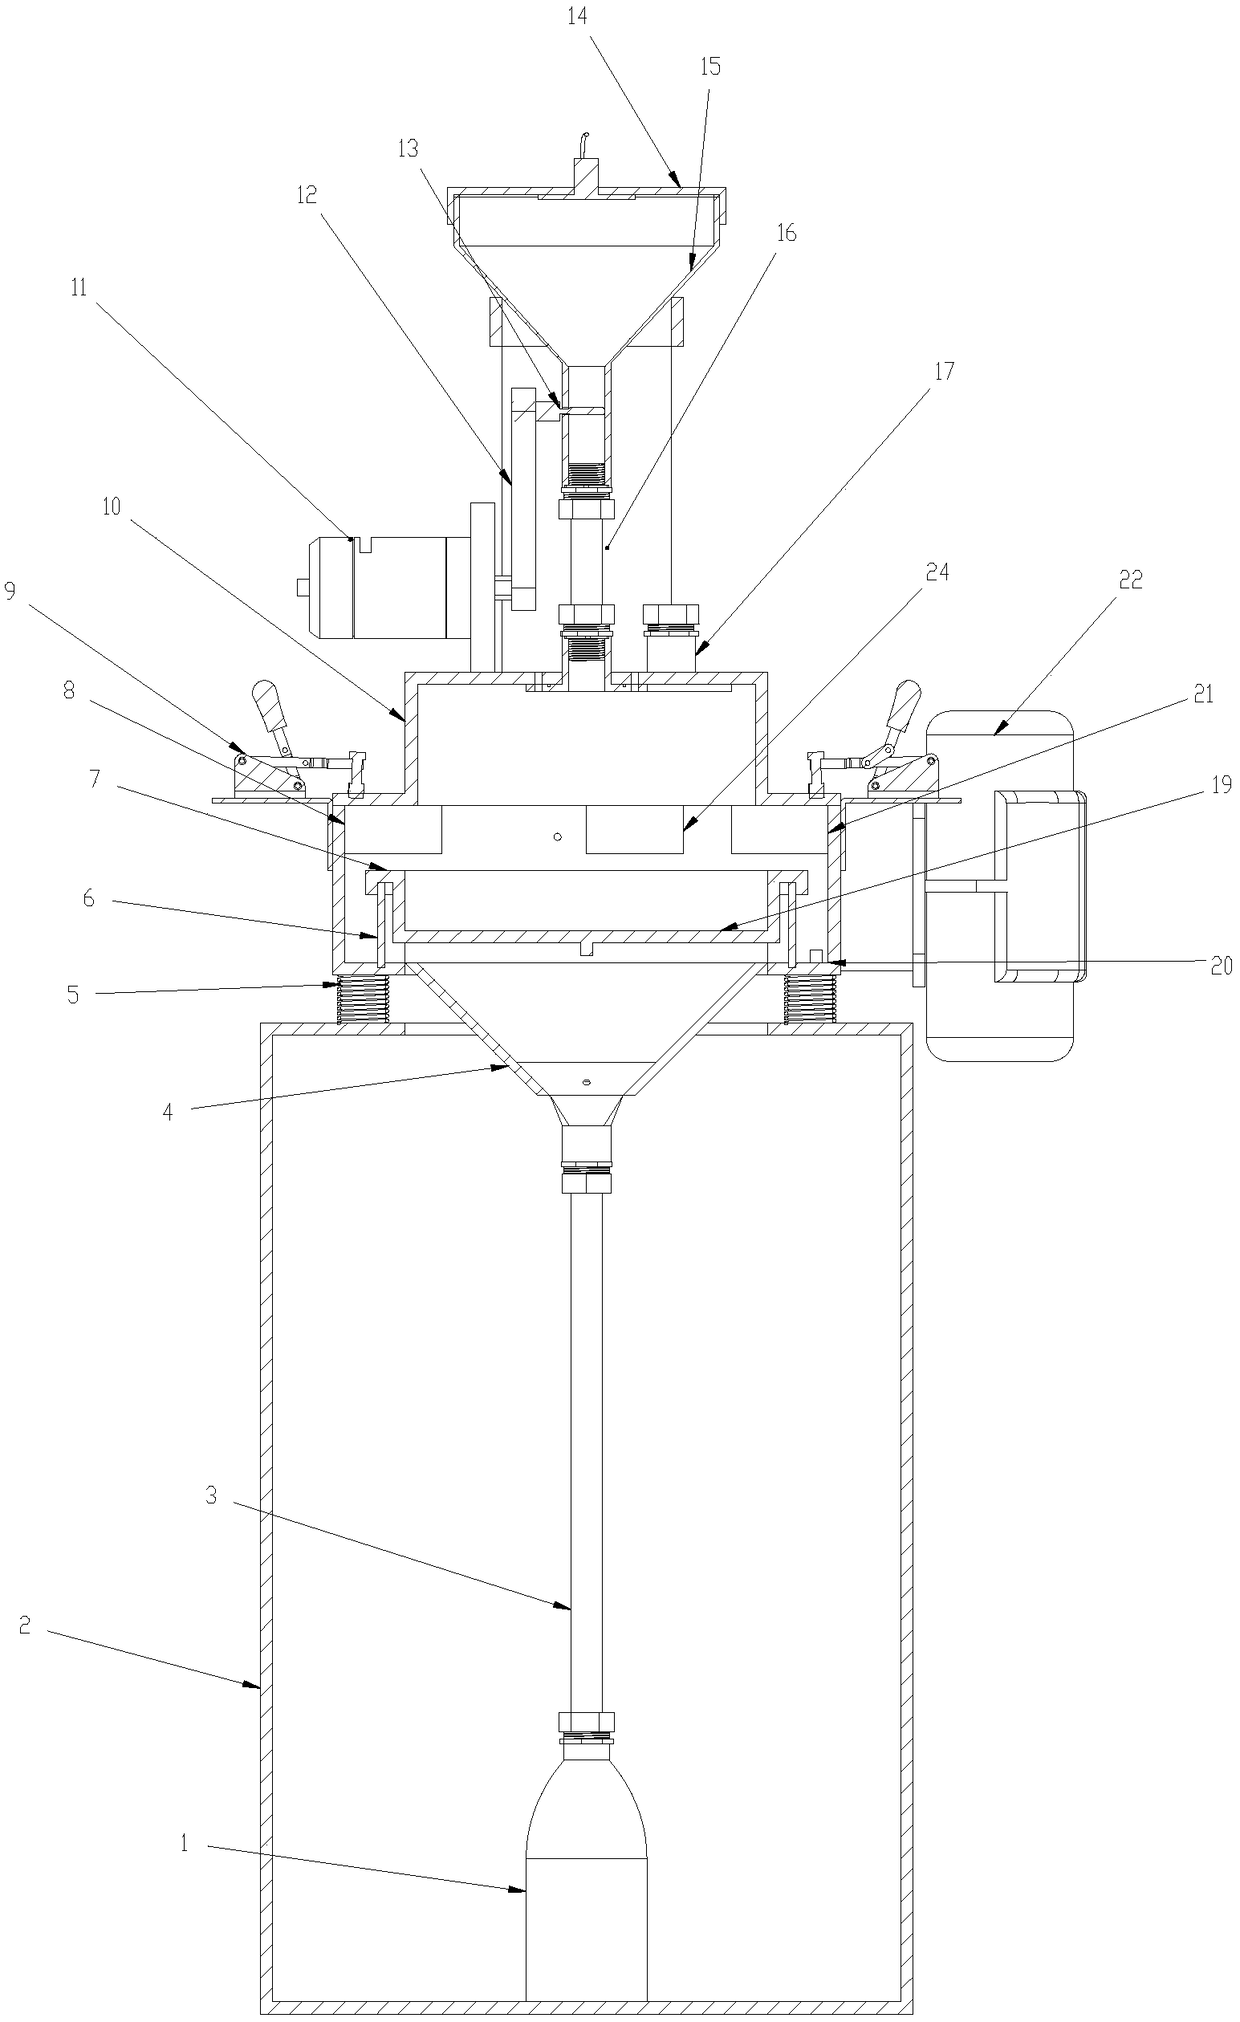 Airtight powder screening system and method for metal 3D printer